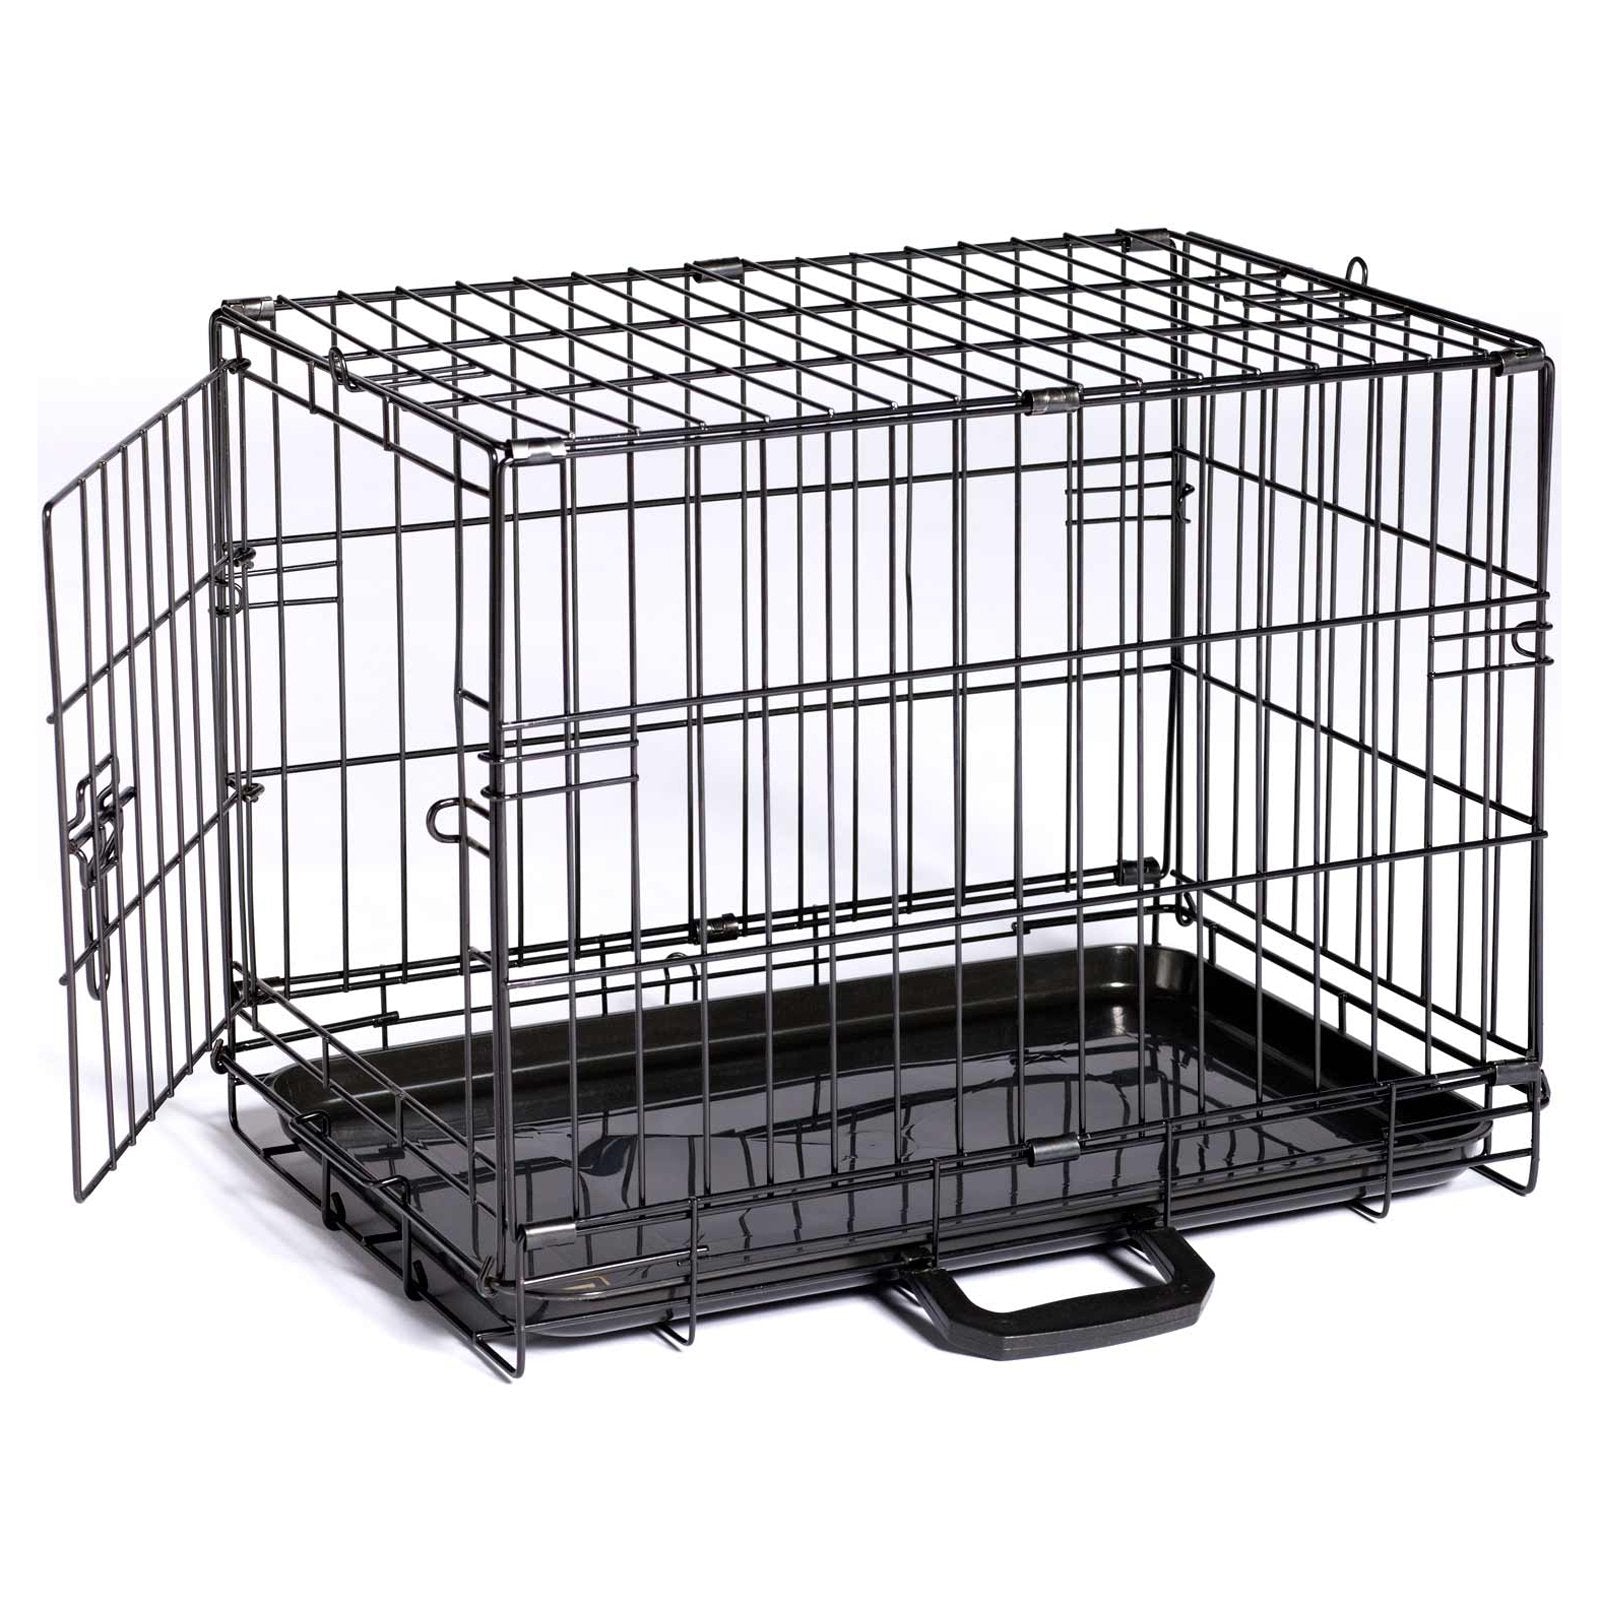 Prevue Pet Products Folding Dog Crate， Black， Small， 30.50